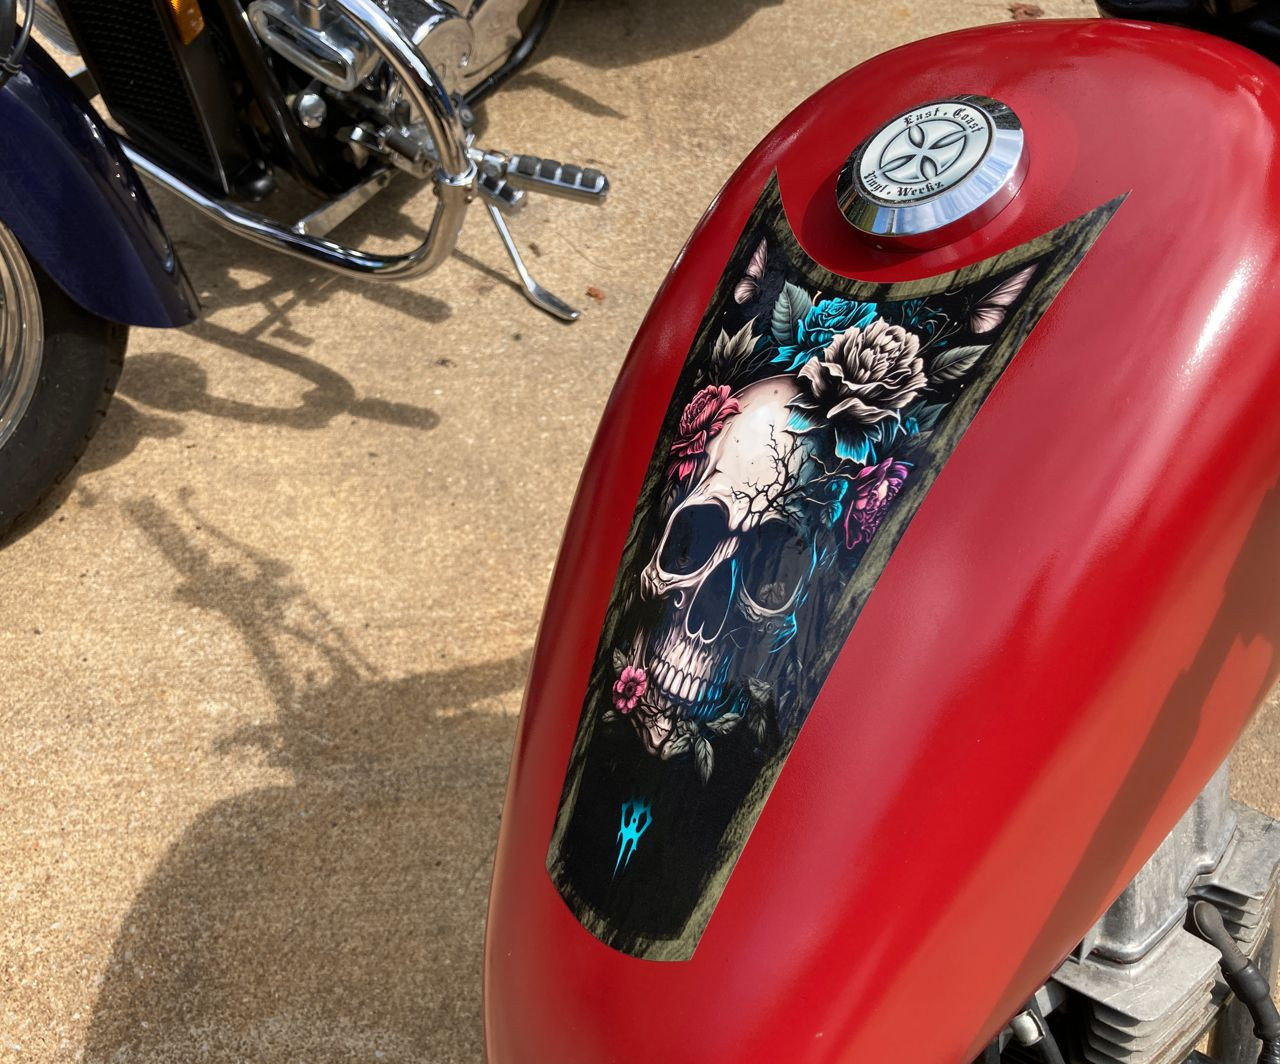 Candy Wineberry custom paint job with flames on a Road Glide using